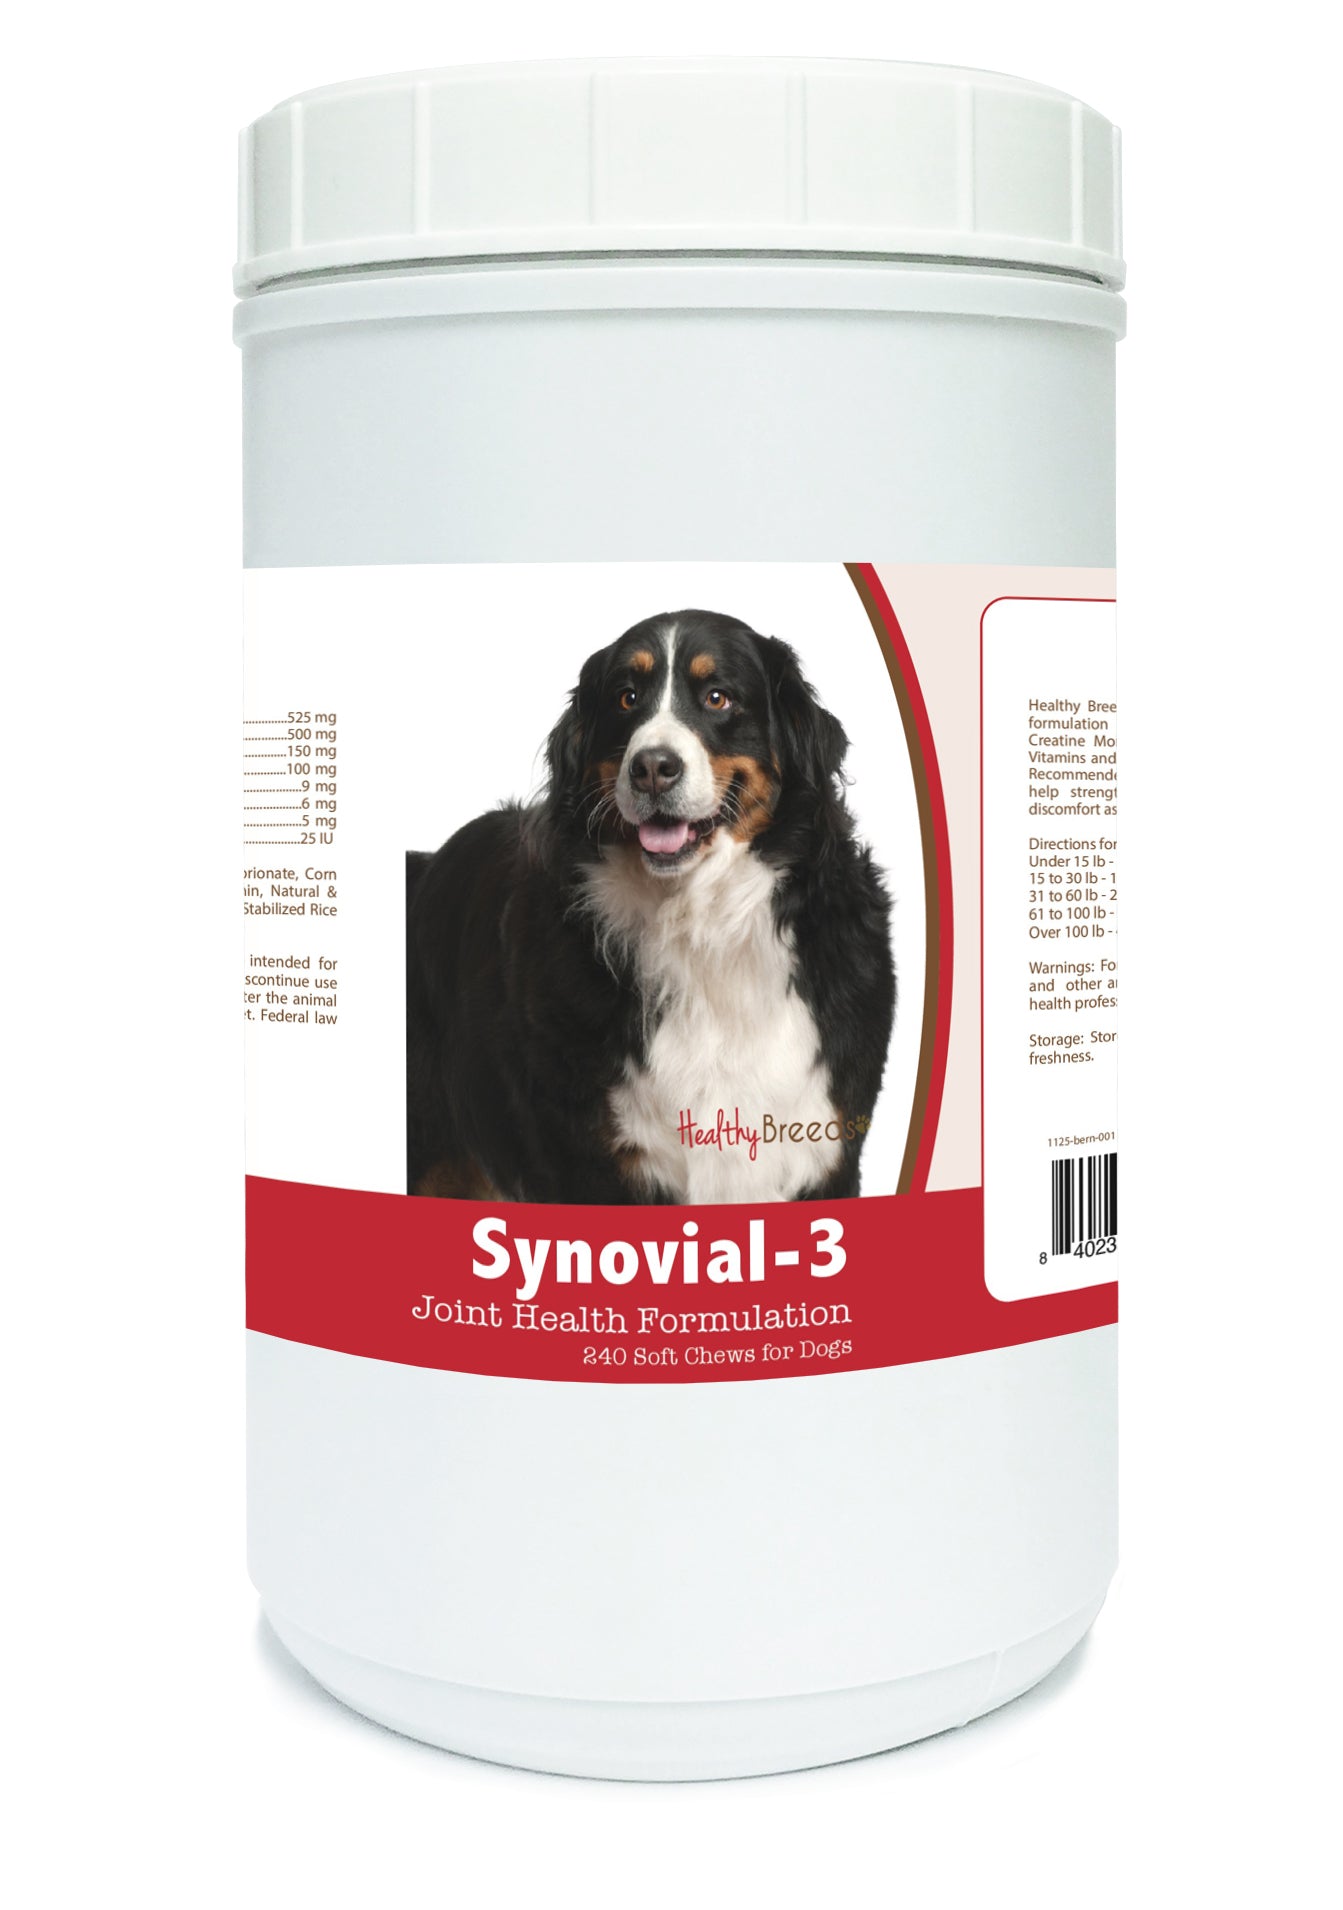 Bernese Mountain Dog Synovial-3 Joint Health Formulation Soft Chews 240 Count